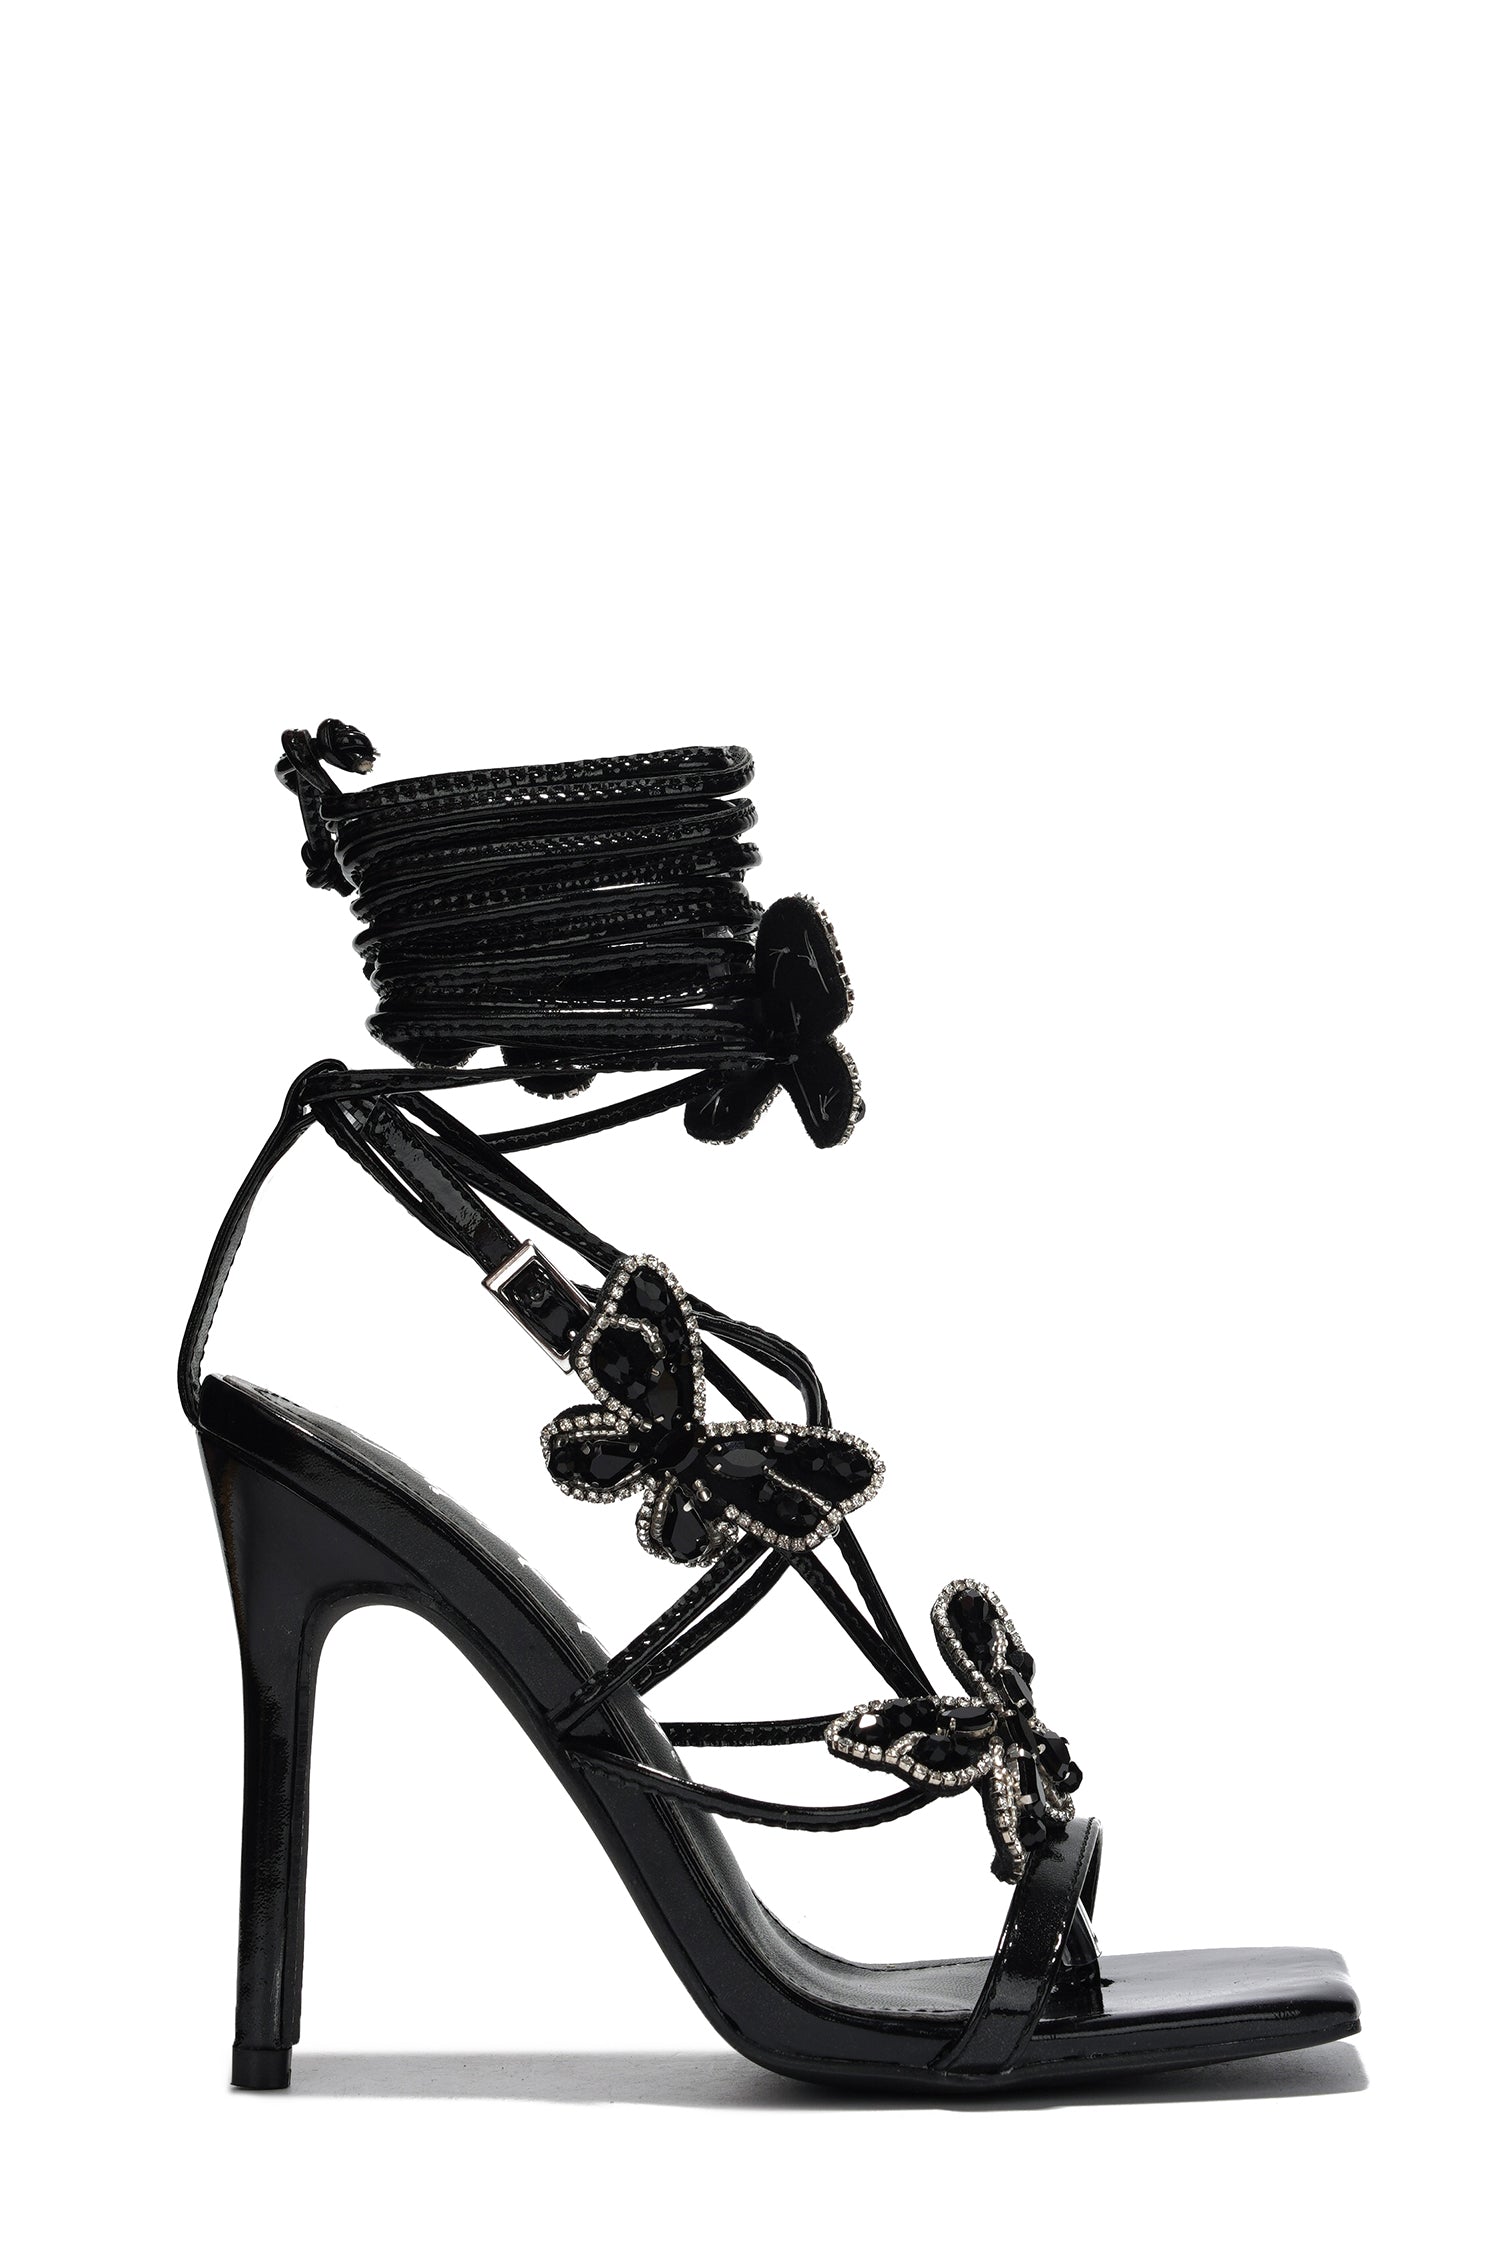 UrbanOG - Vonni Square Toe Butterfly Strappy High Heels - HEELS